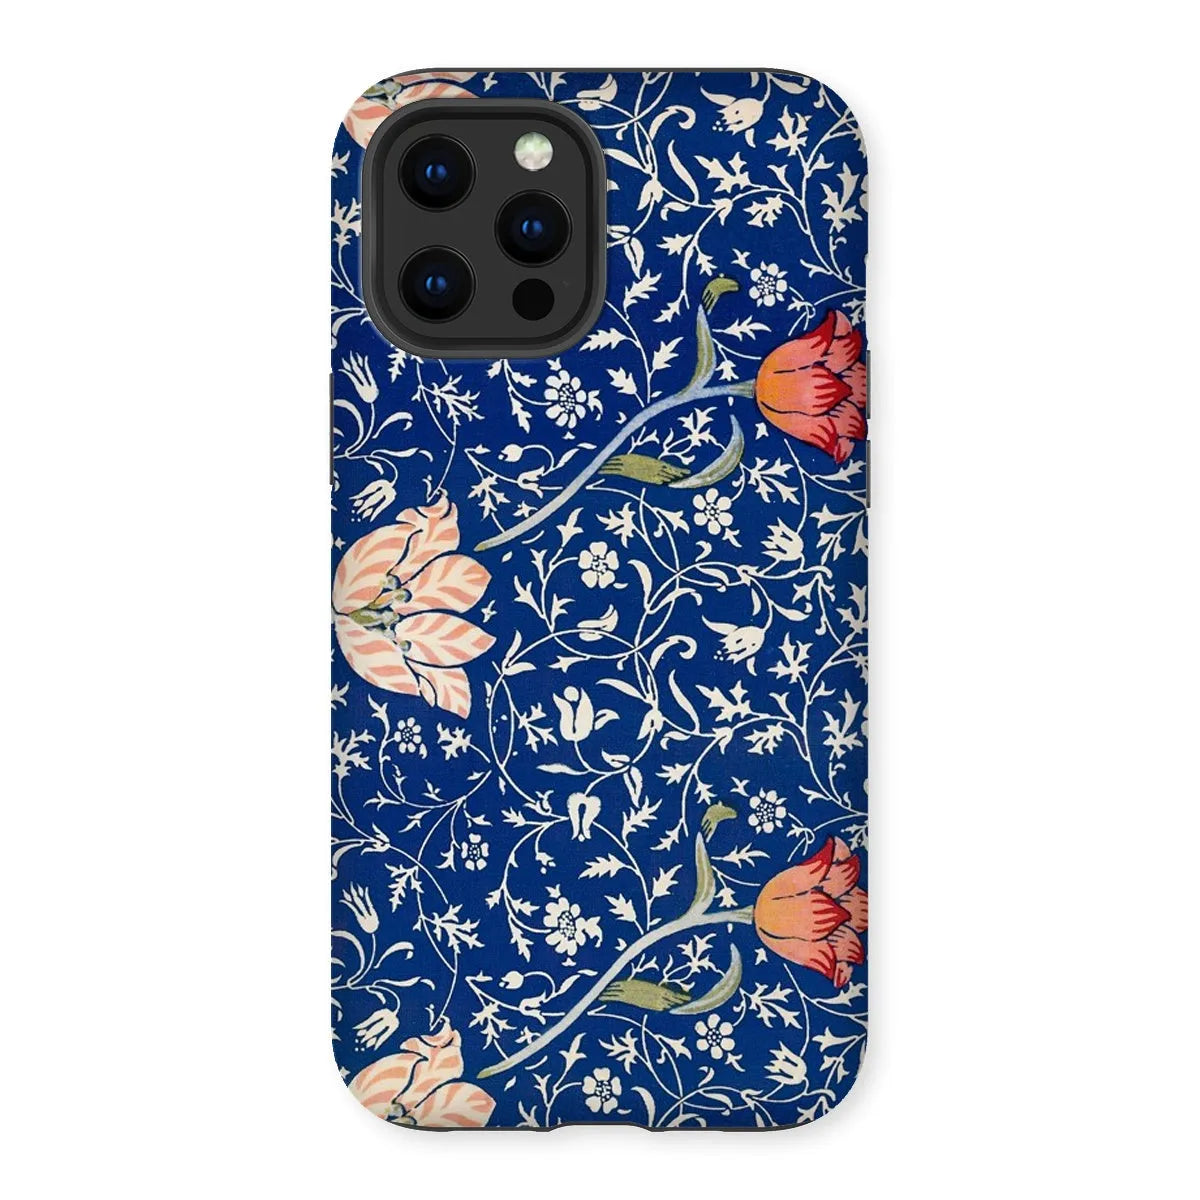 Medway - Floral Aesthetic Art Phone Case - William Morris - Iphone 12 Pro Max / Matte - Mobile Phone Cases - Aesthetic